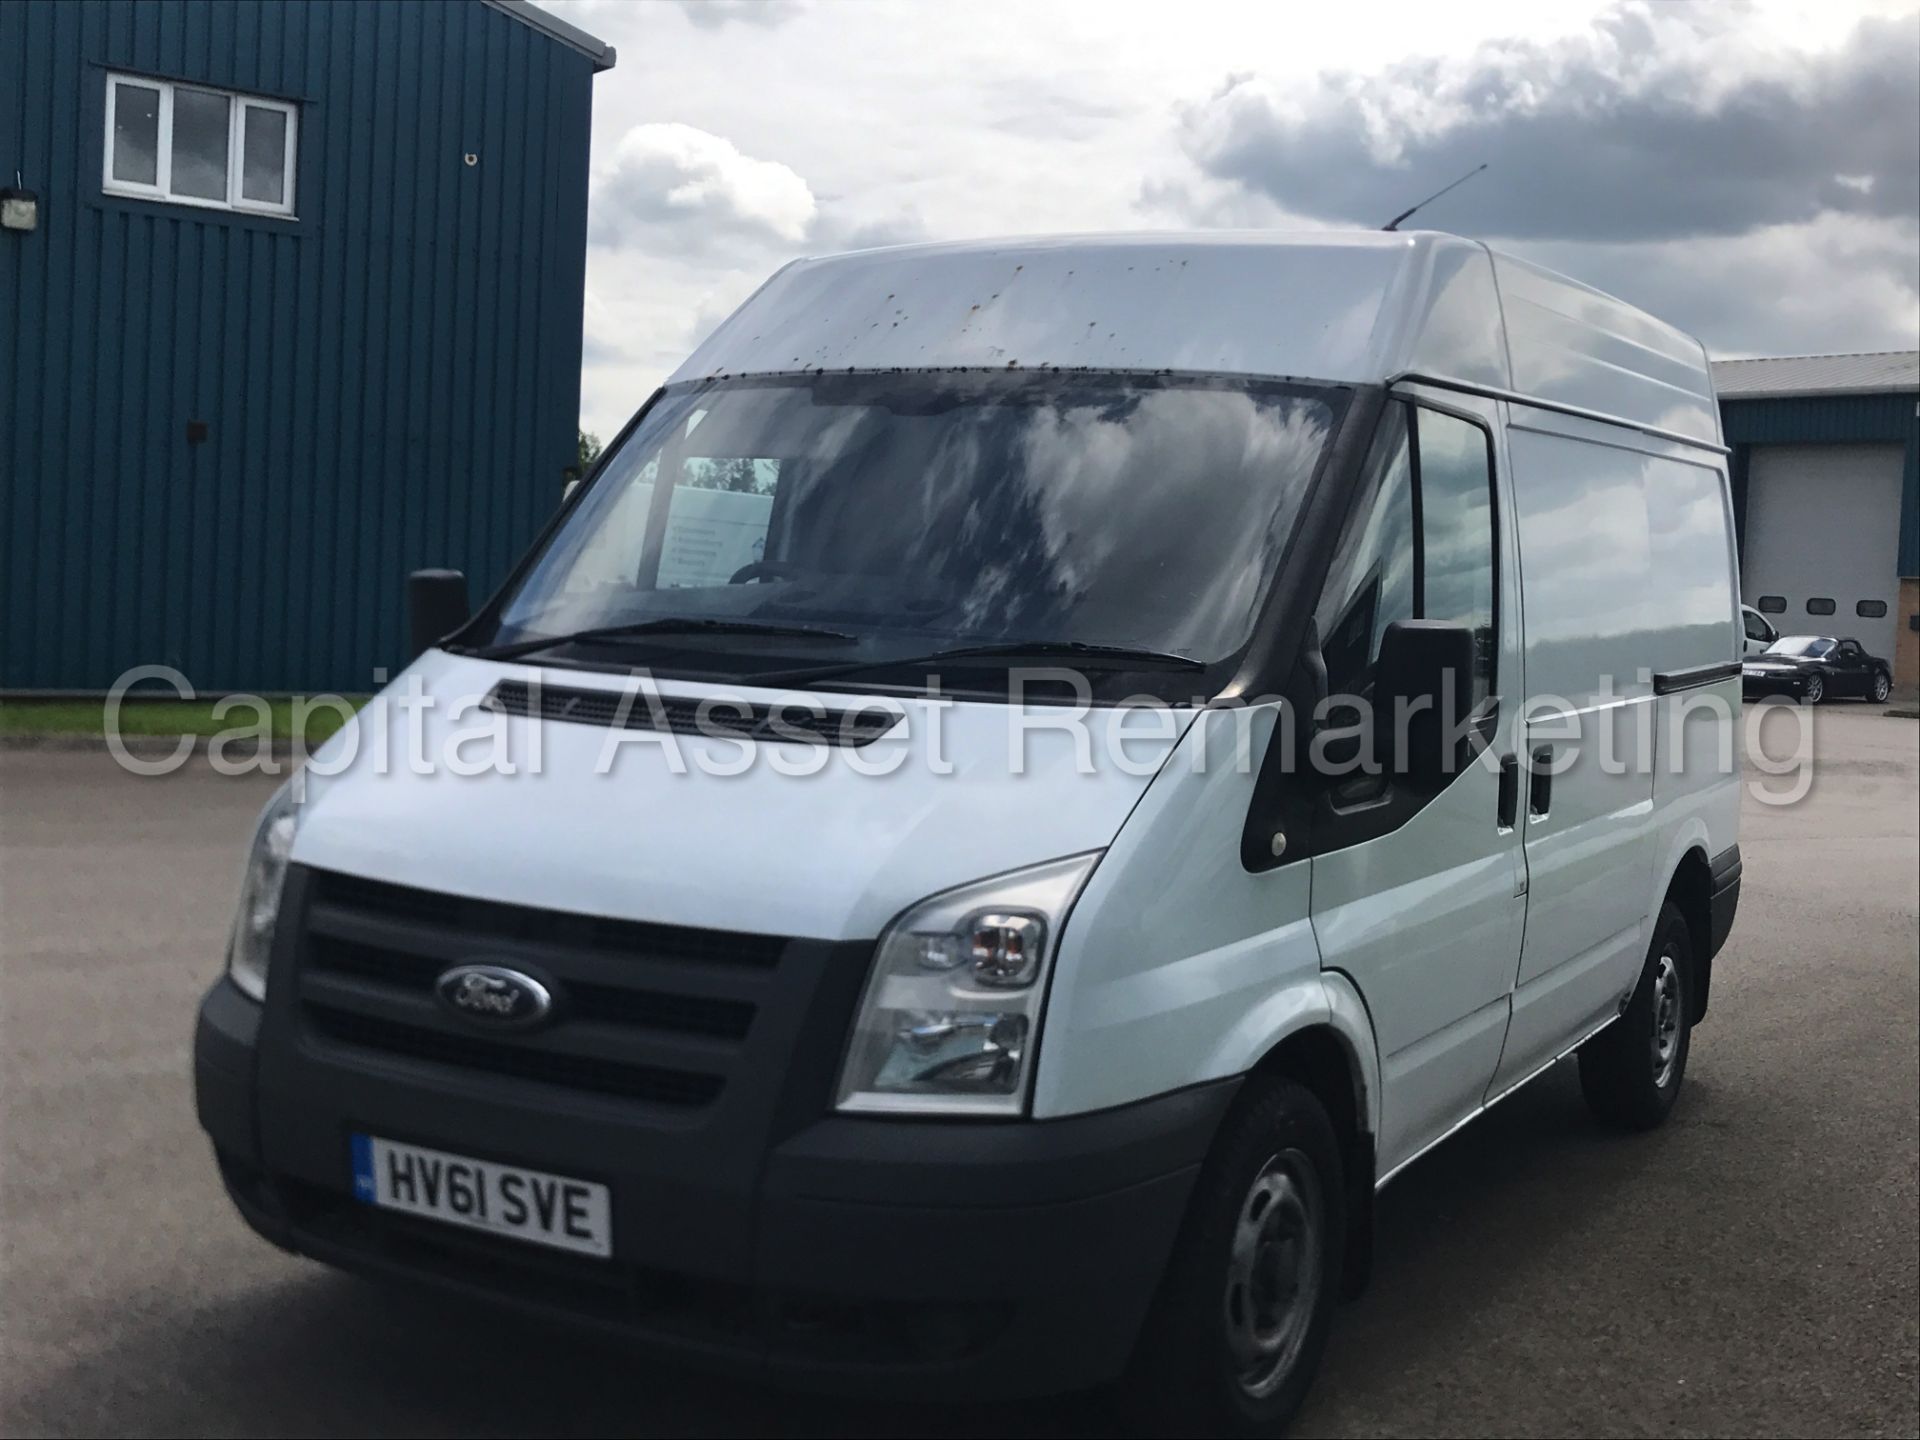 FORD TRANSIT 85 T280M FWD 'SWB HI-ROOF' (2012 MODEL) '2.2 TDCI - 5 SPEED' (1 FORMER KEEPER FROM NEW) - Image 4 of 22